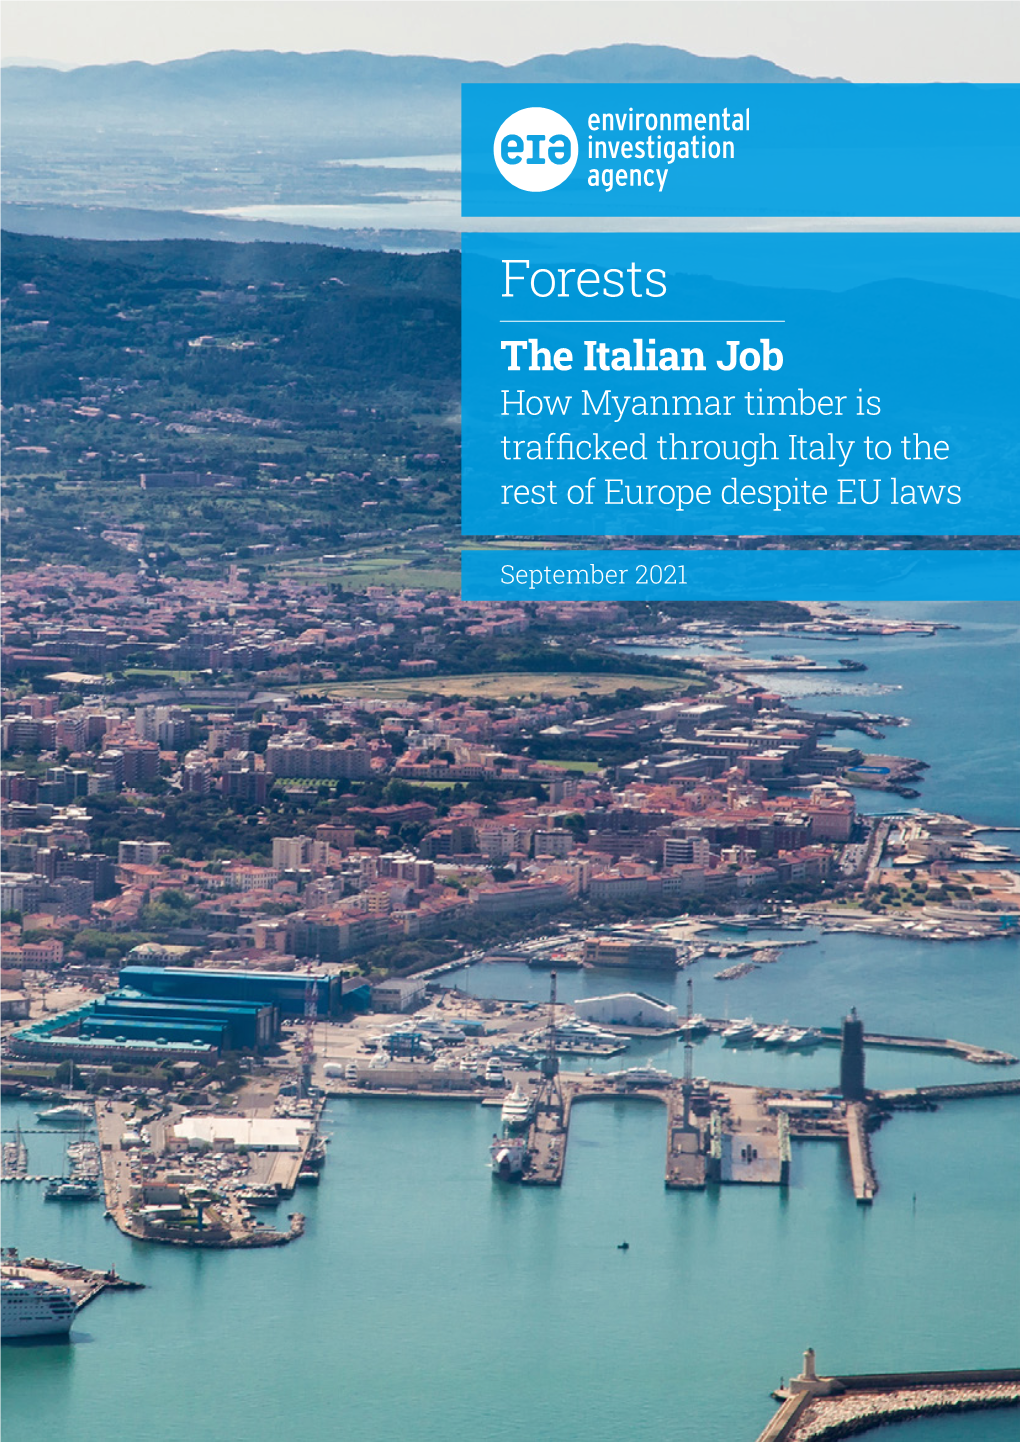 Forests the Italian Job How Myanmar Timber Is Trafficked Through Italy to the Rest of Europe Despite EU Laws